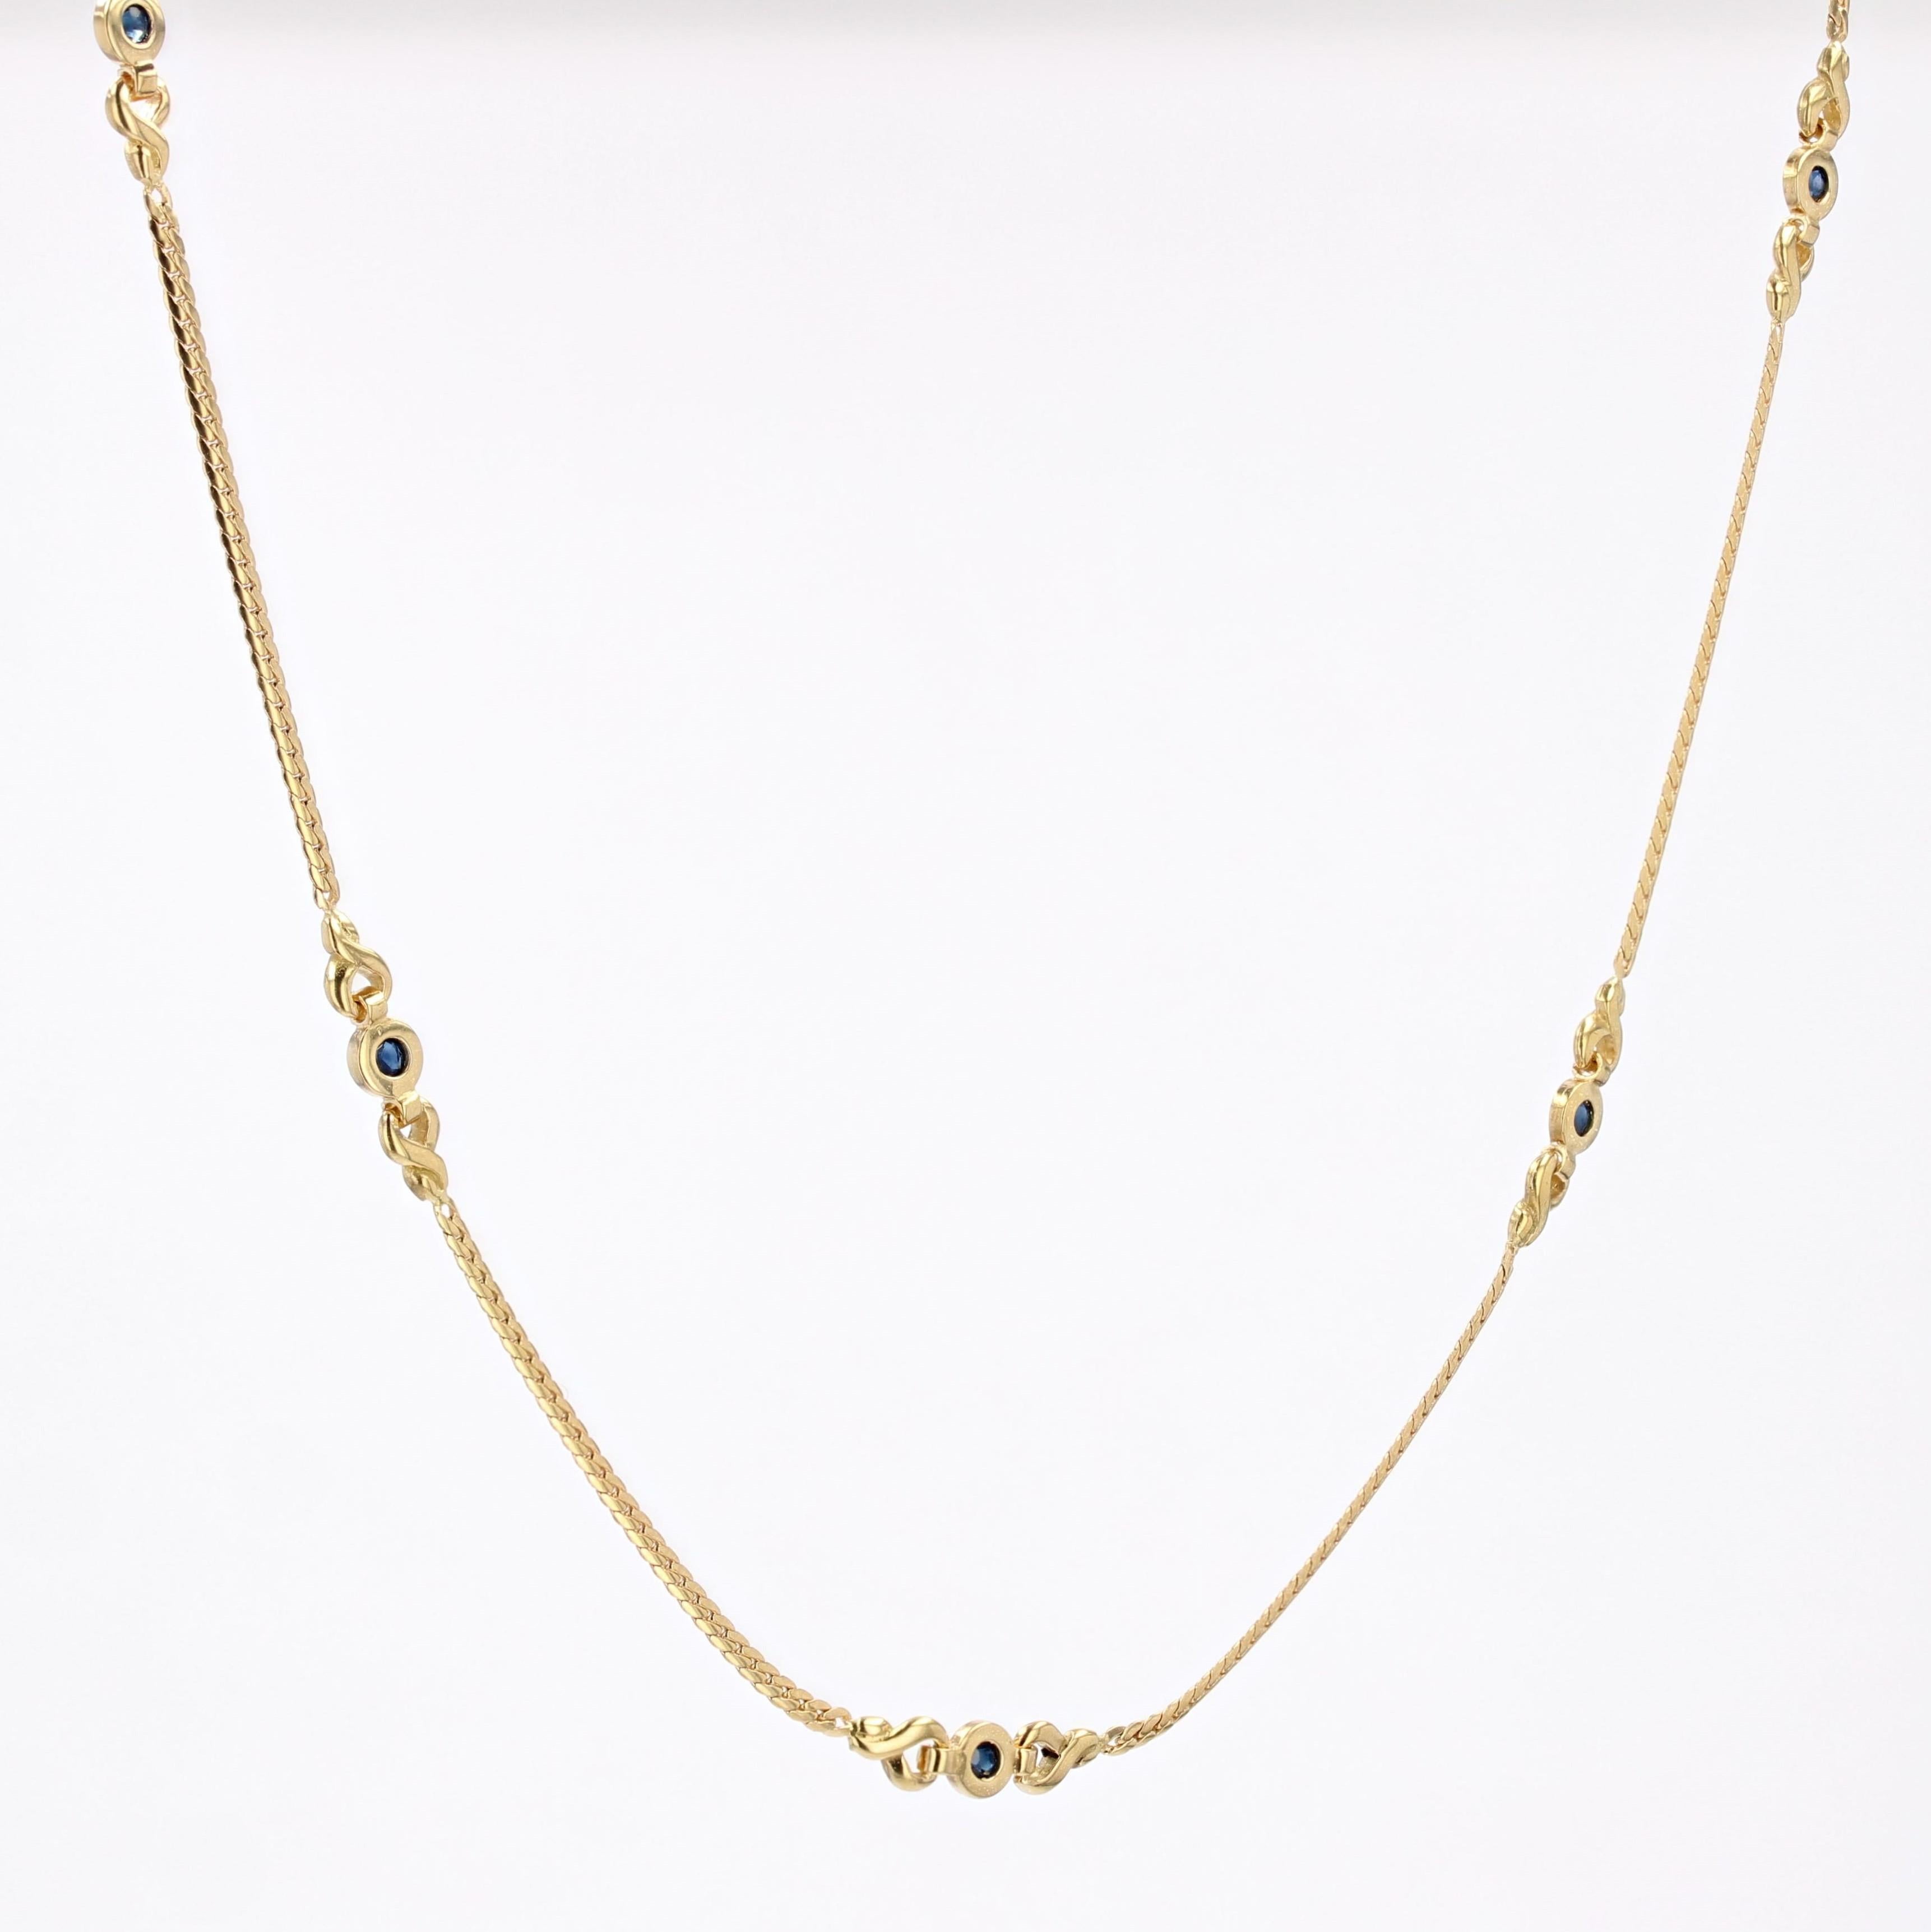 Women's 1980s Sapphires 18 Karat Yellow Gold Curb Chain Choker Necklace For Sale